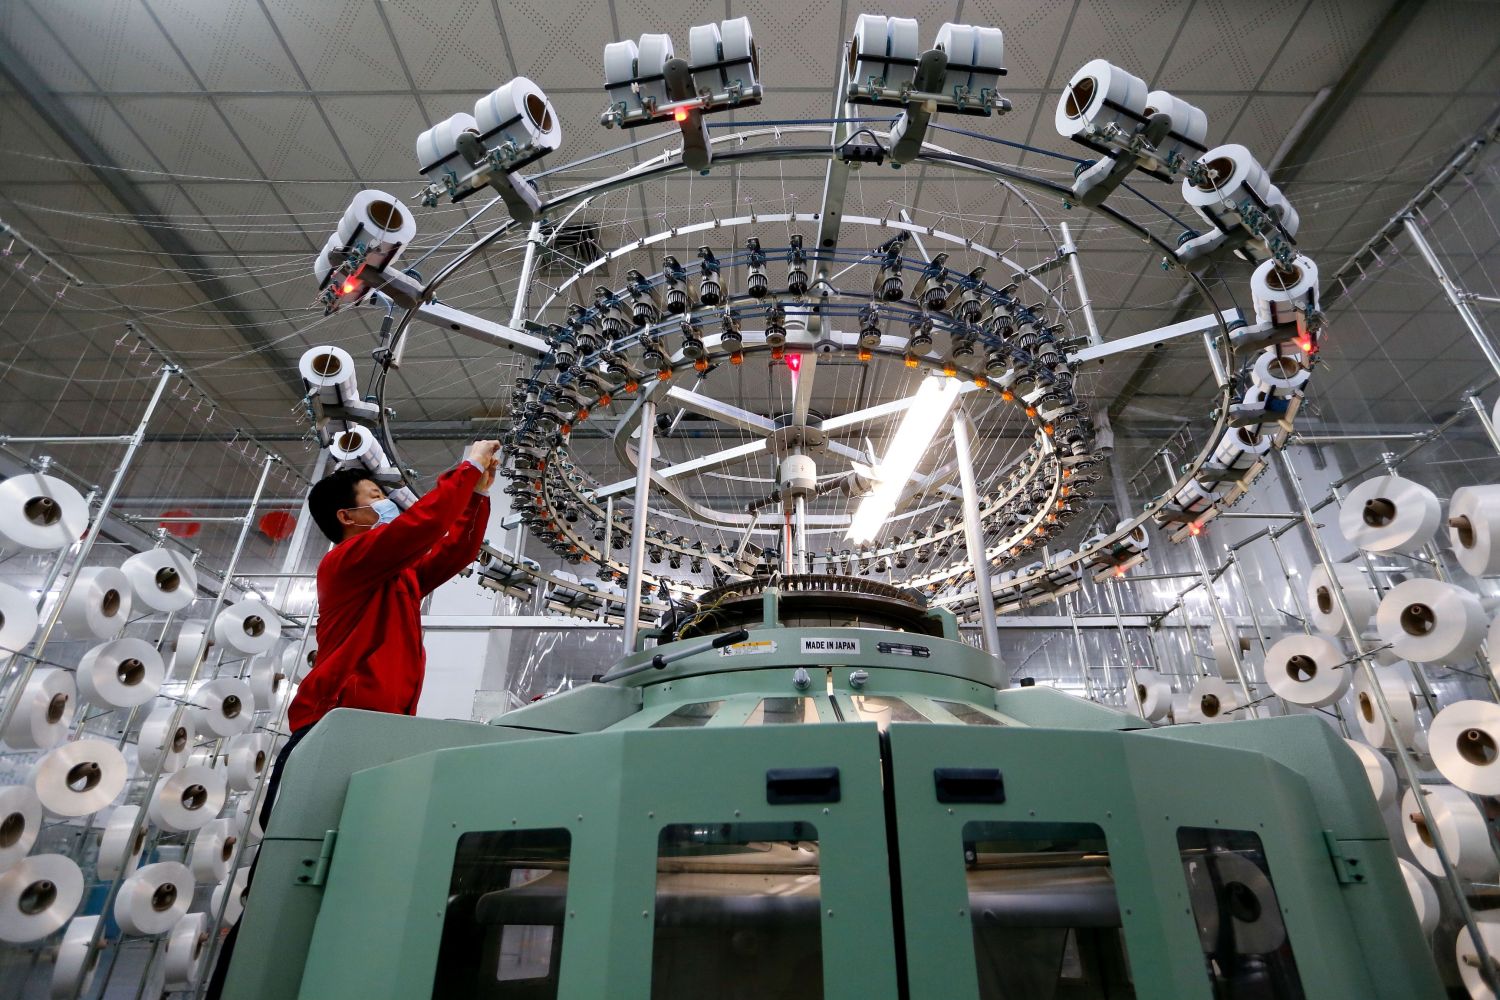 A textile worker is seen on a fabric production line at a factory in Qingdao, Shandong province, China February 14, 2020. China Daily via REUTERS  ATTENTION EDITORS - THIS IMAGE WAS PROVIDED BY A THIRD PARTY. CHINA OUT.